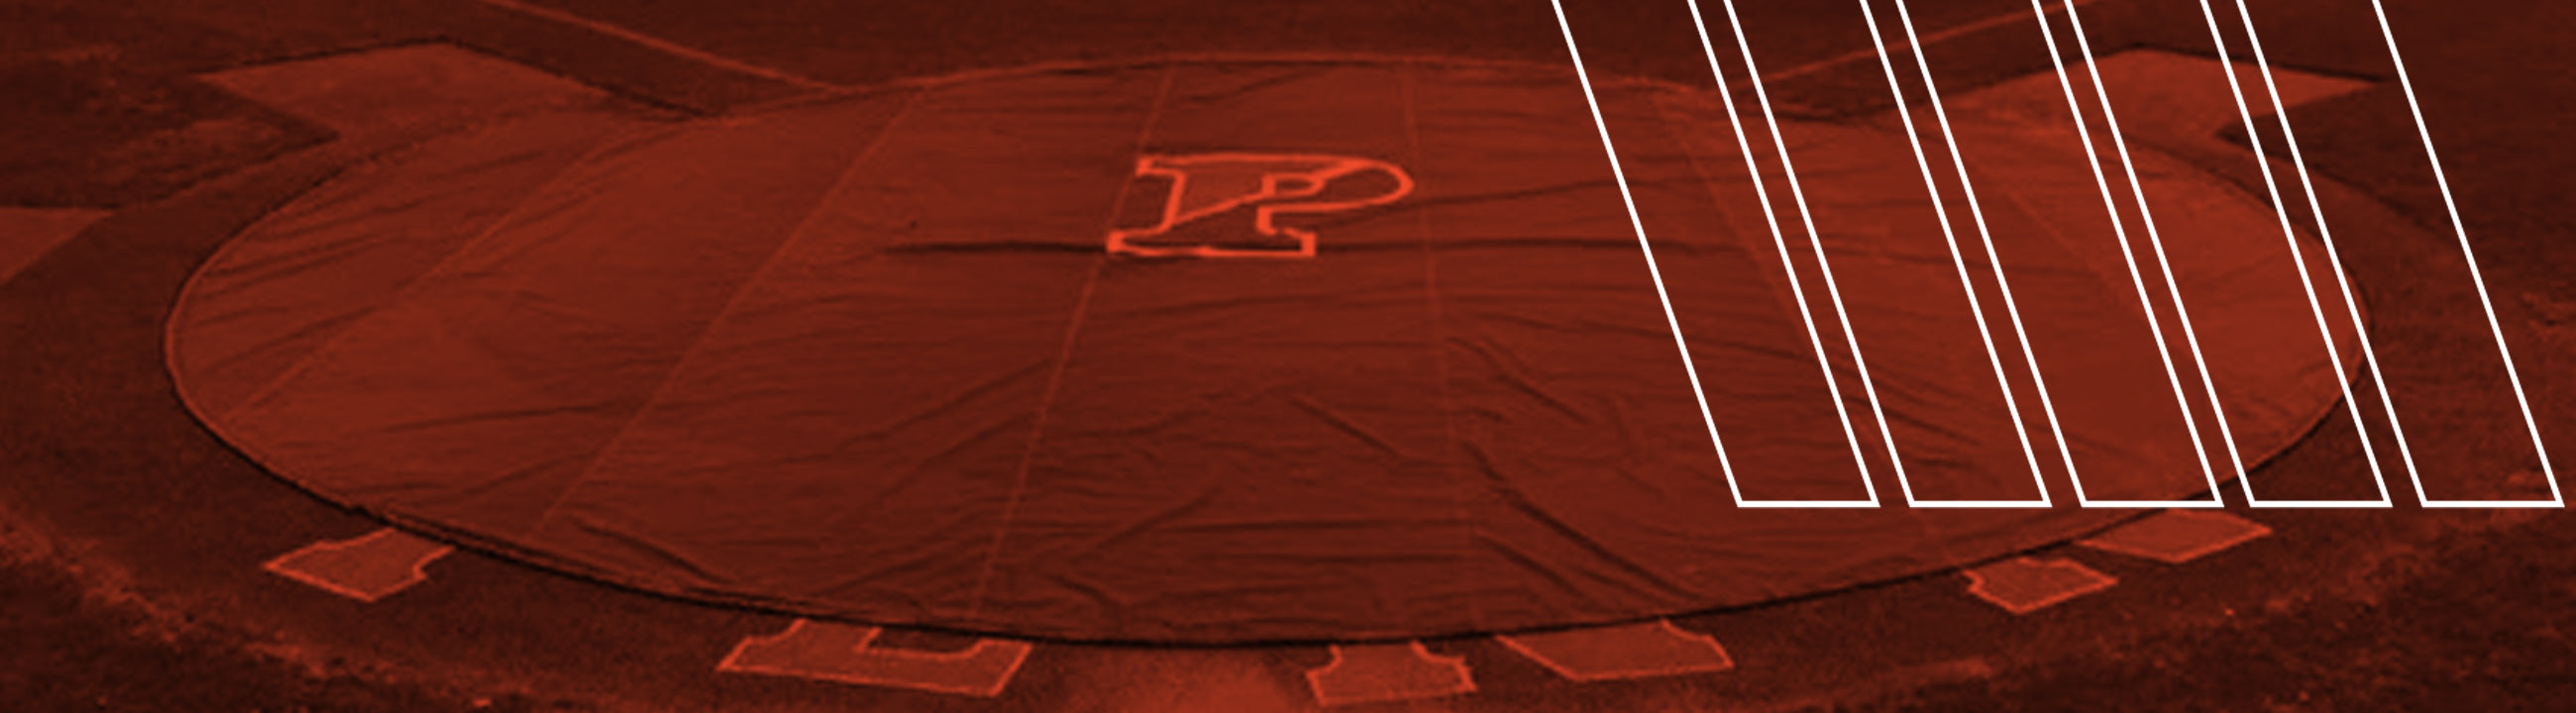 Pitching Mound Tarps and Covers